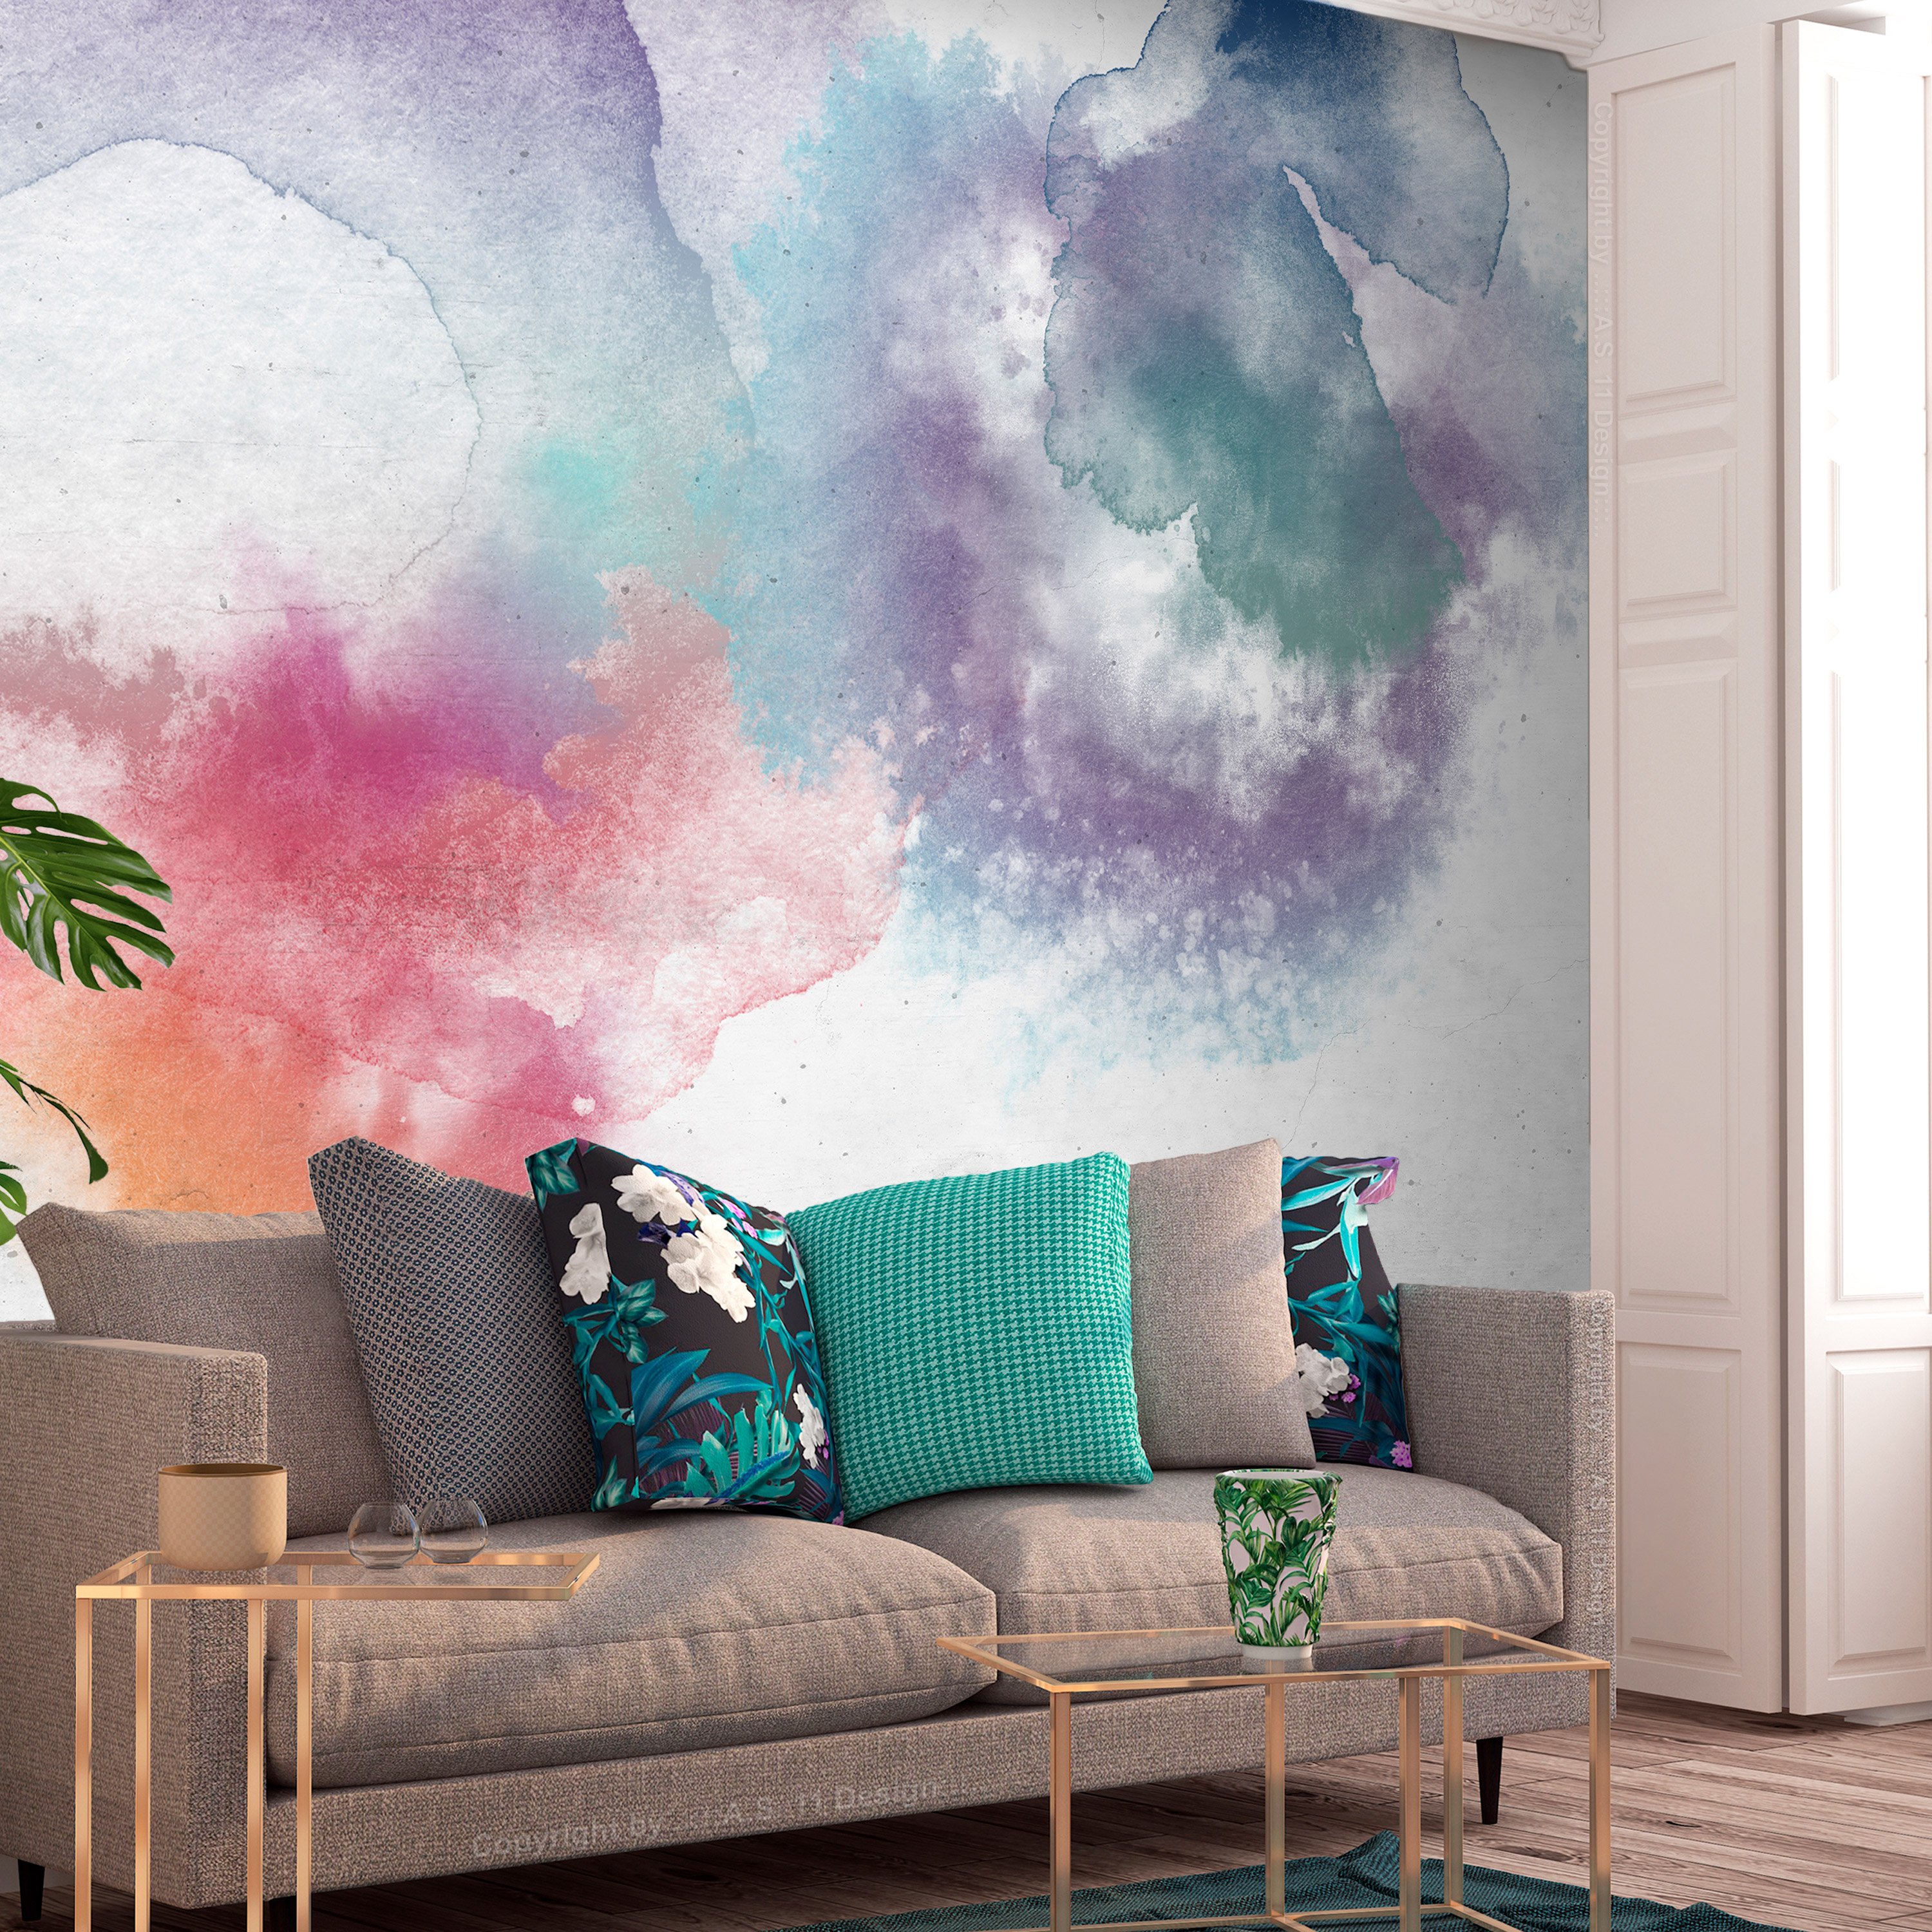 Self-adhesive Wallpaper - Painted Mirages - First Variant - 294x210